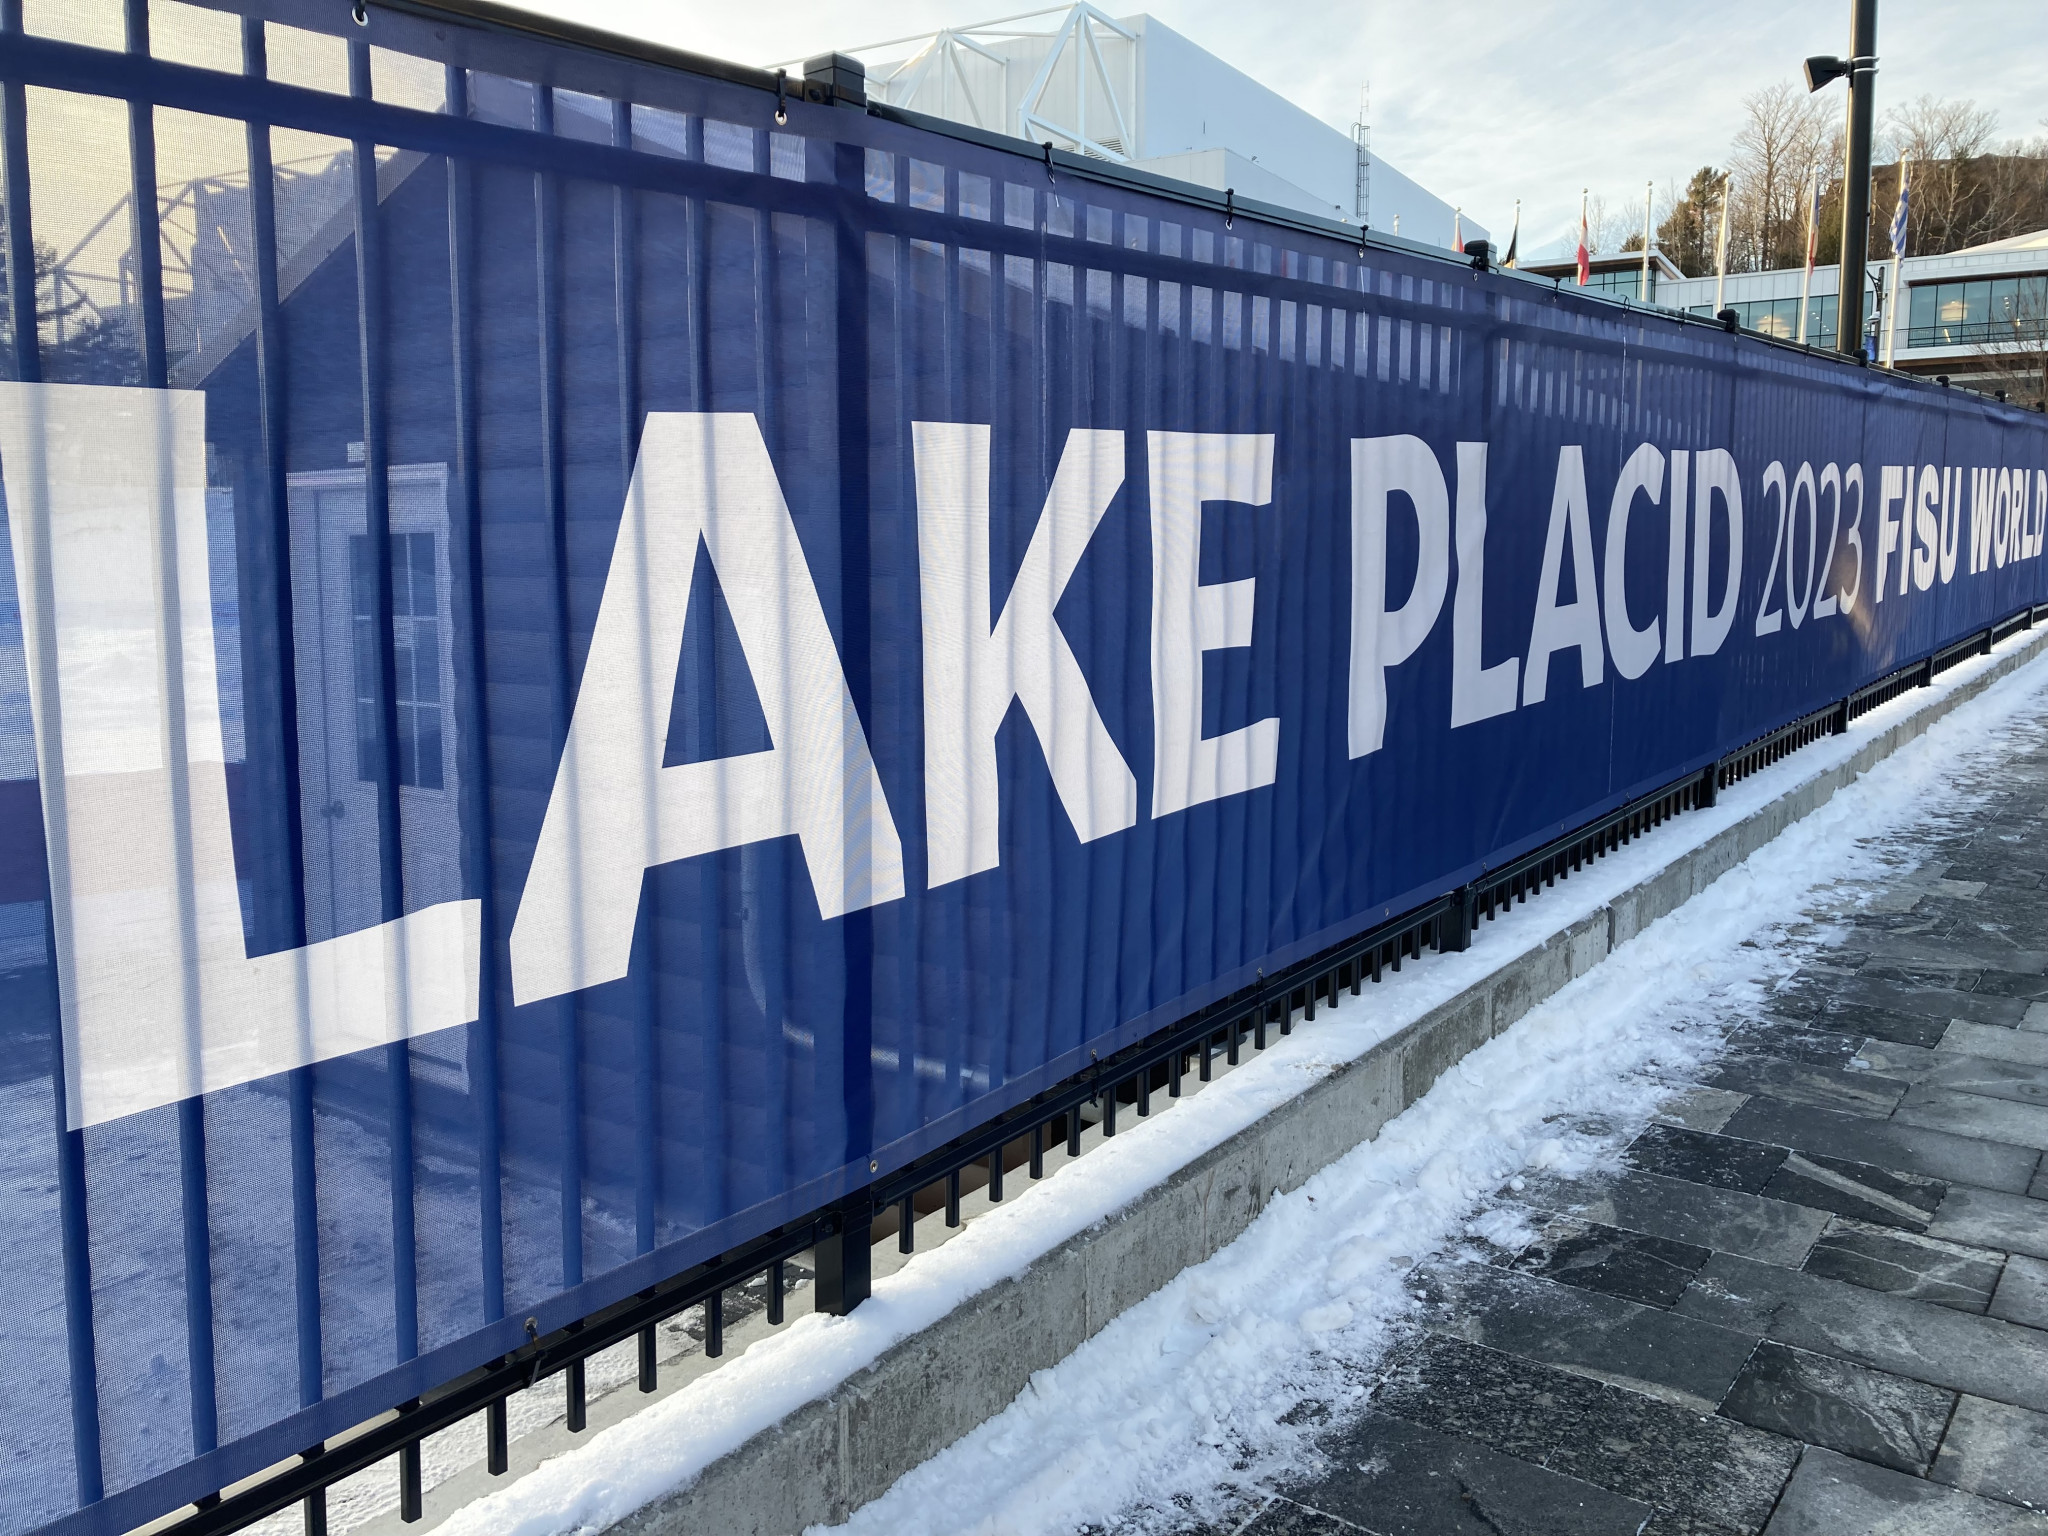 Athletes from Croatia, Chinese Taipei, Haiti, Ireland, Luxembourg and the Philippines have yet to arrive in Lake Placid according to FISU ©ITG